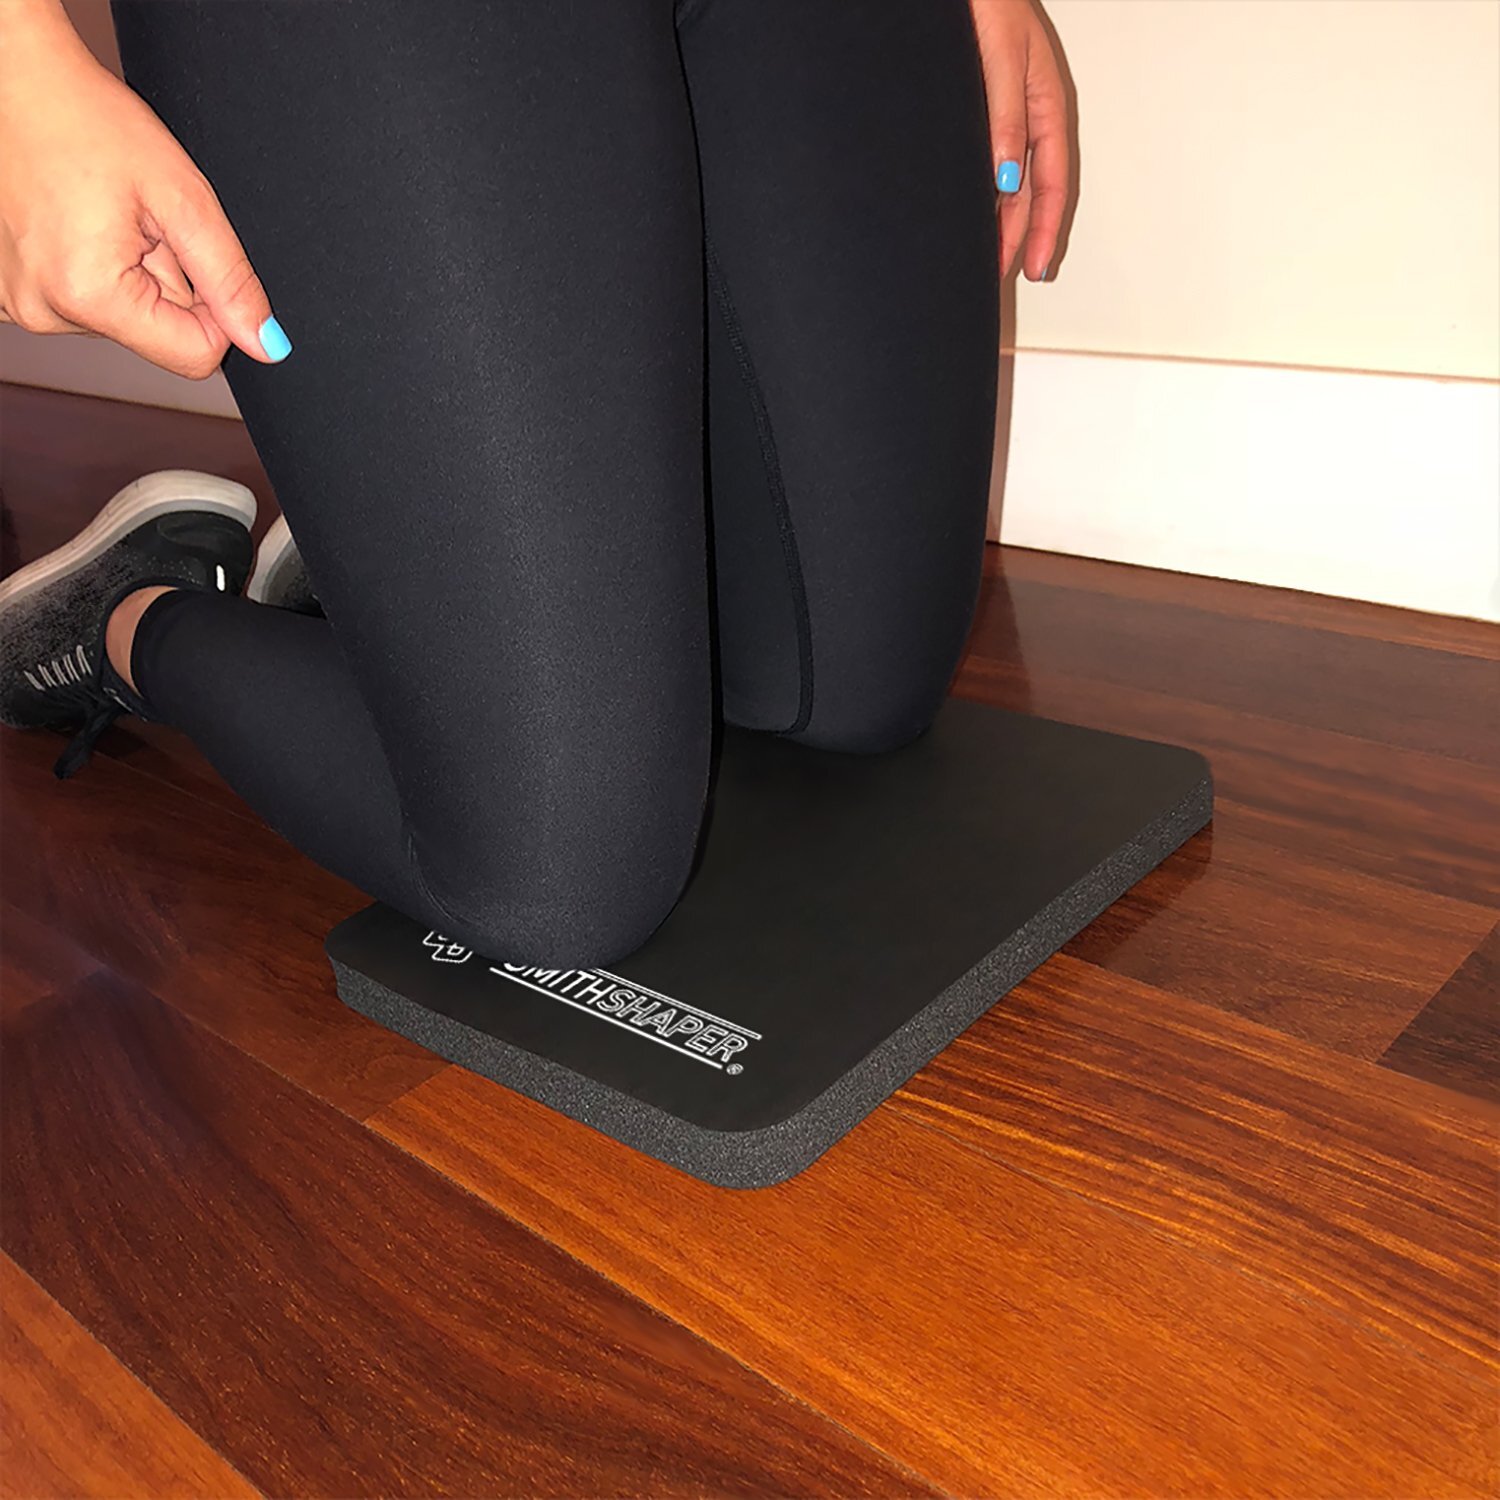 Extra Thick and Soft 1 25mm Pad Provides Cushion for Kneeling and Elbows Yoga Great Portable Exercise Mat for Planks Impulse Fitness Knee Mat Ab Rollers 